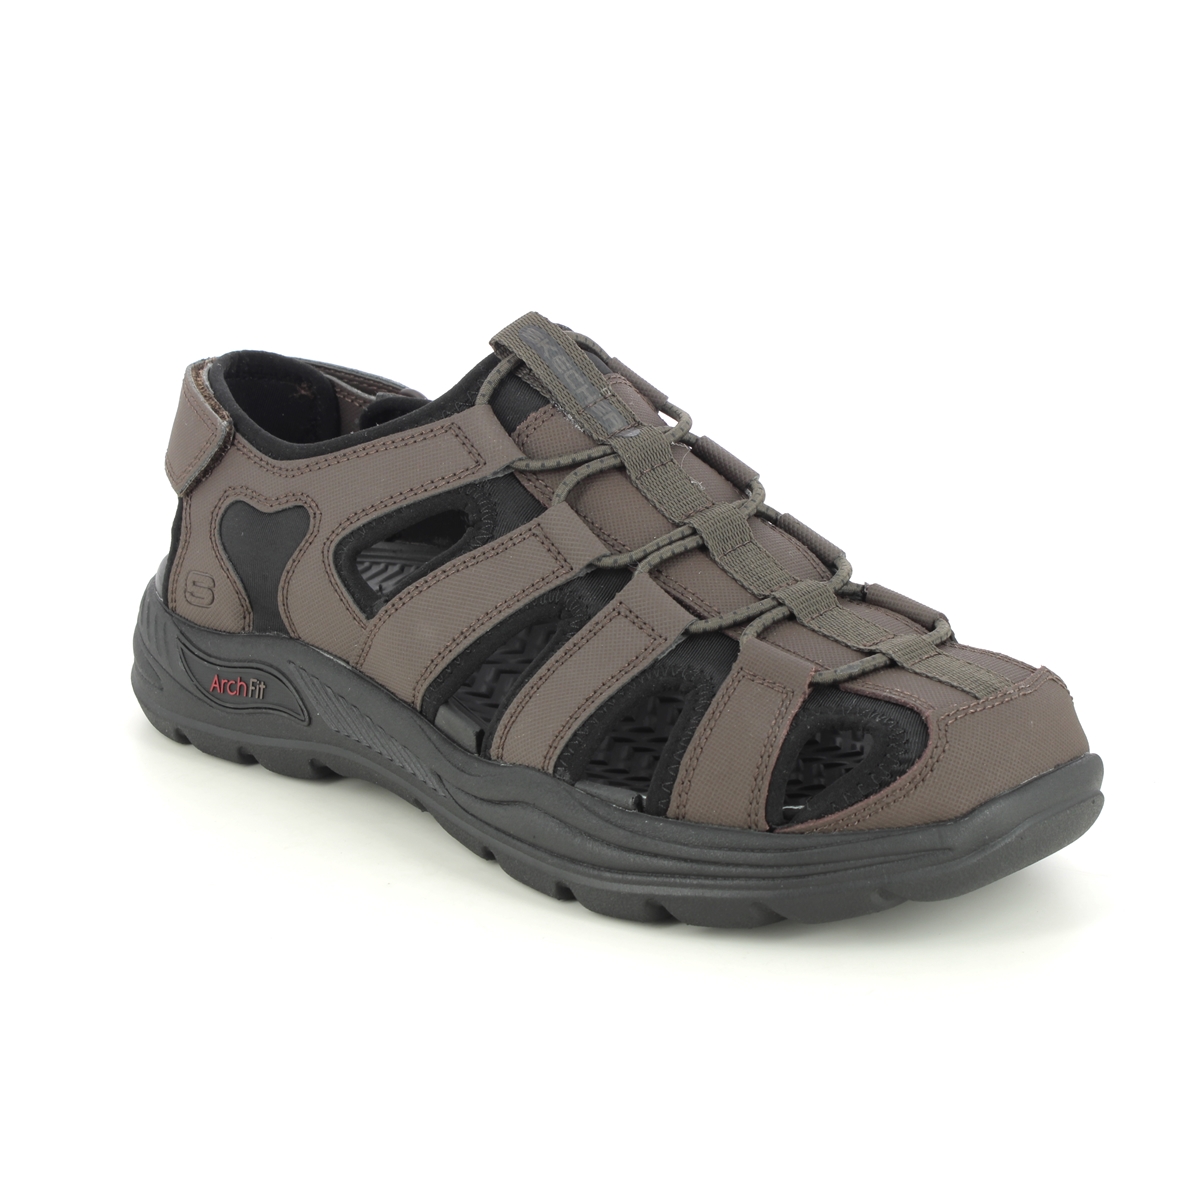 Skechers Arch Fit Motley Verlander CHOC Chocolate brown Mens Closed Toe Sandals 204348 in a Plain Man-made in Size 8